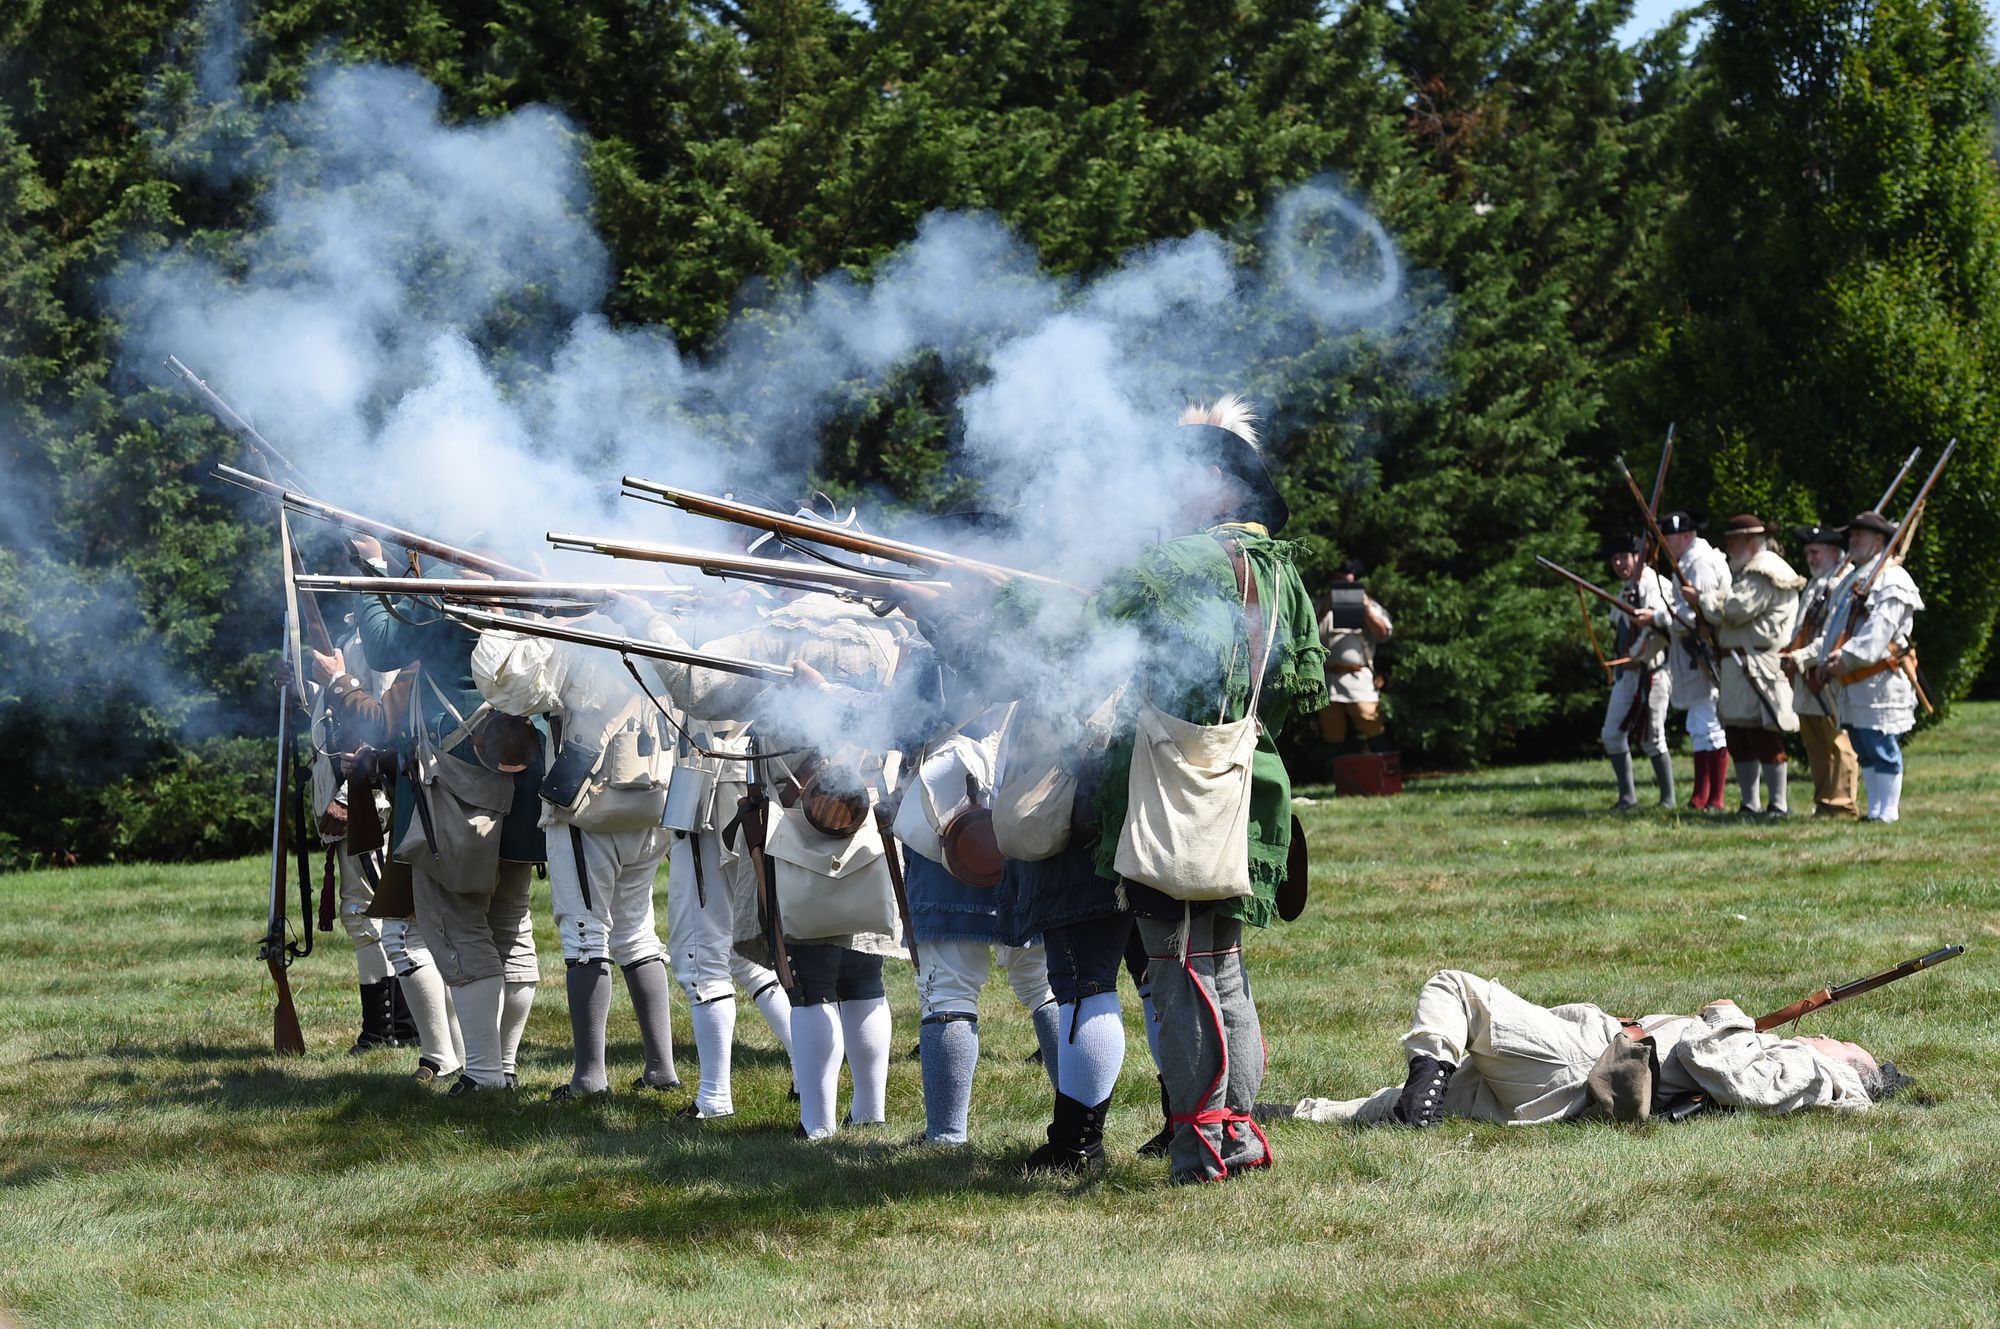 Battle of Brooklyn Raged at Greenwood Cemetery This Weekend